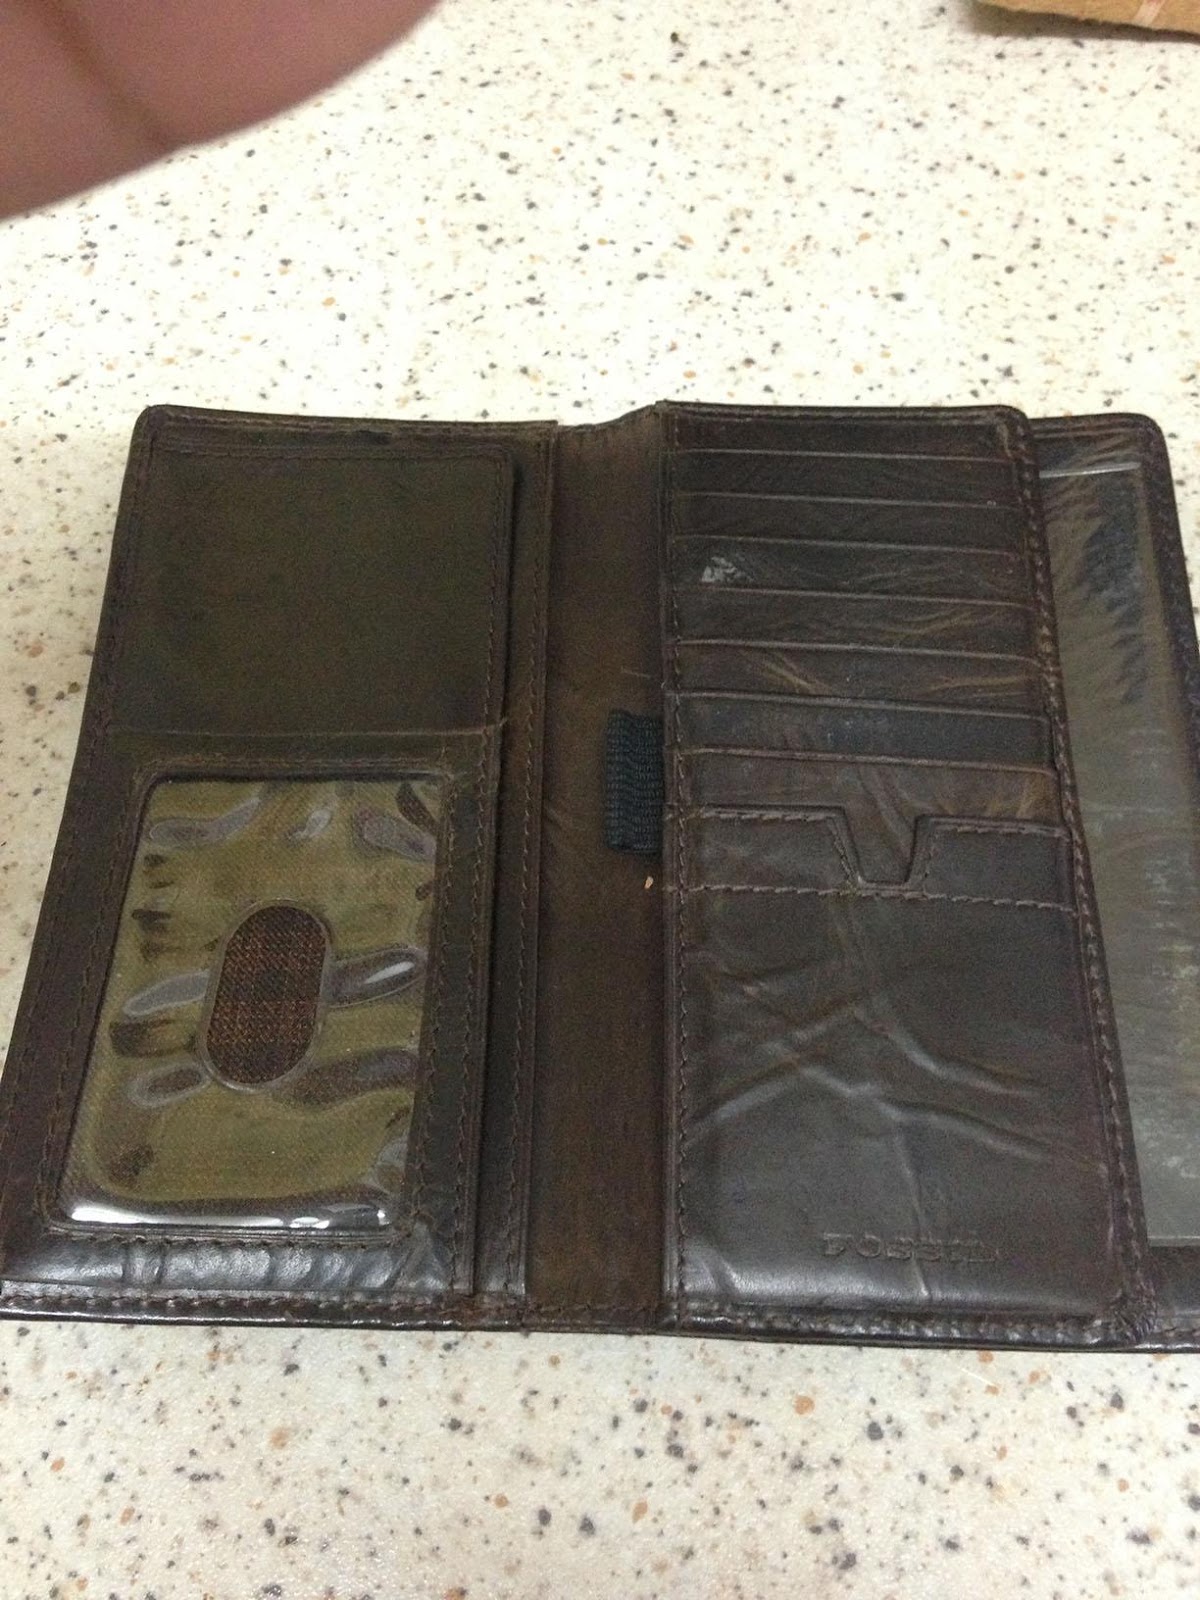 Tokmoton: FOSSIL LONG MEN'S Wallet Leather (USED)